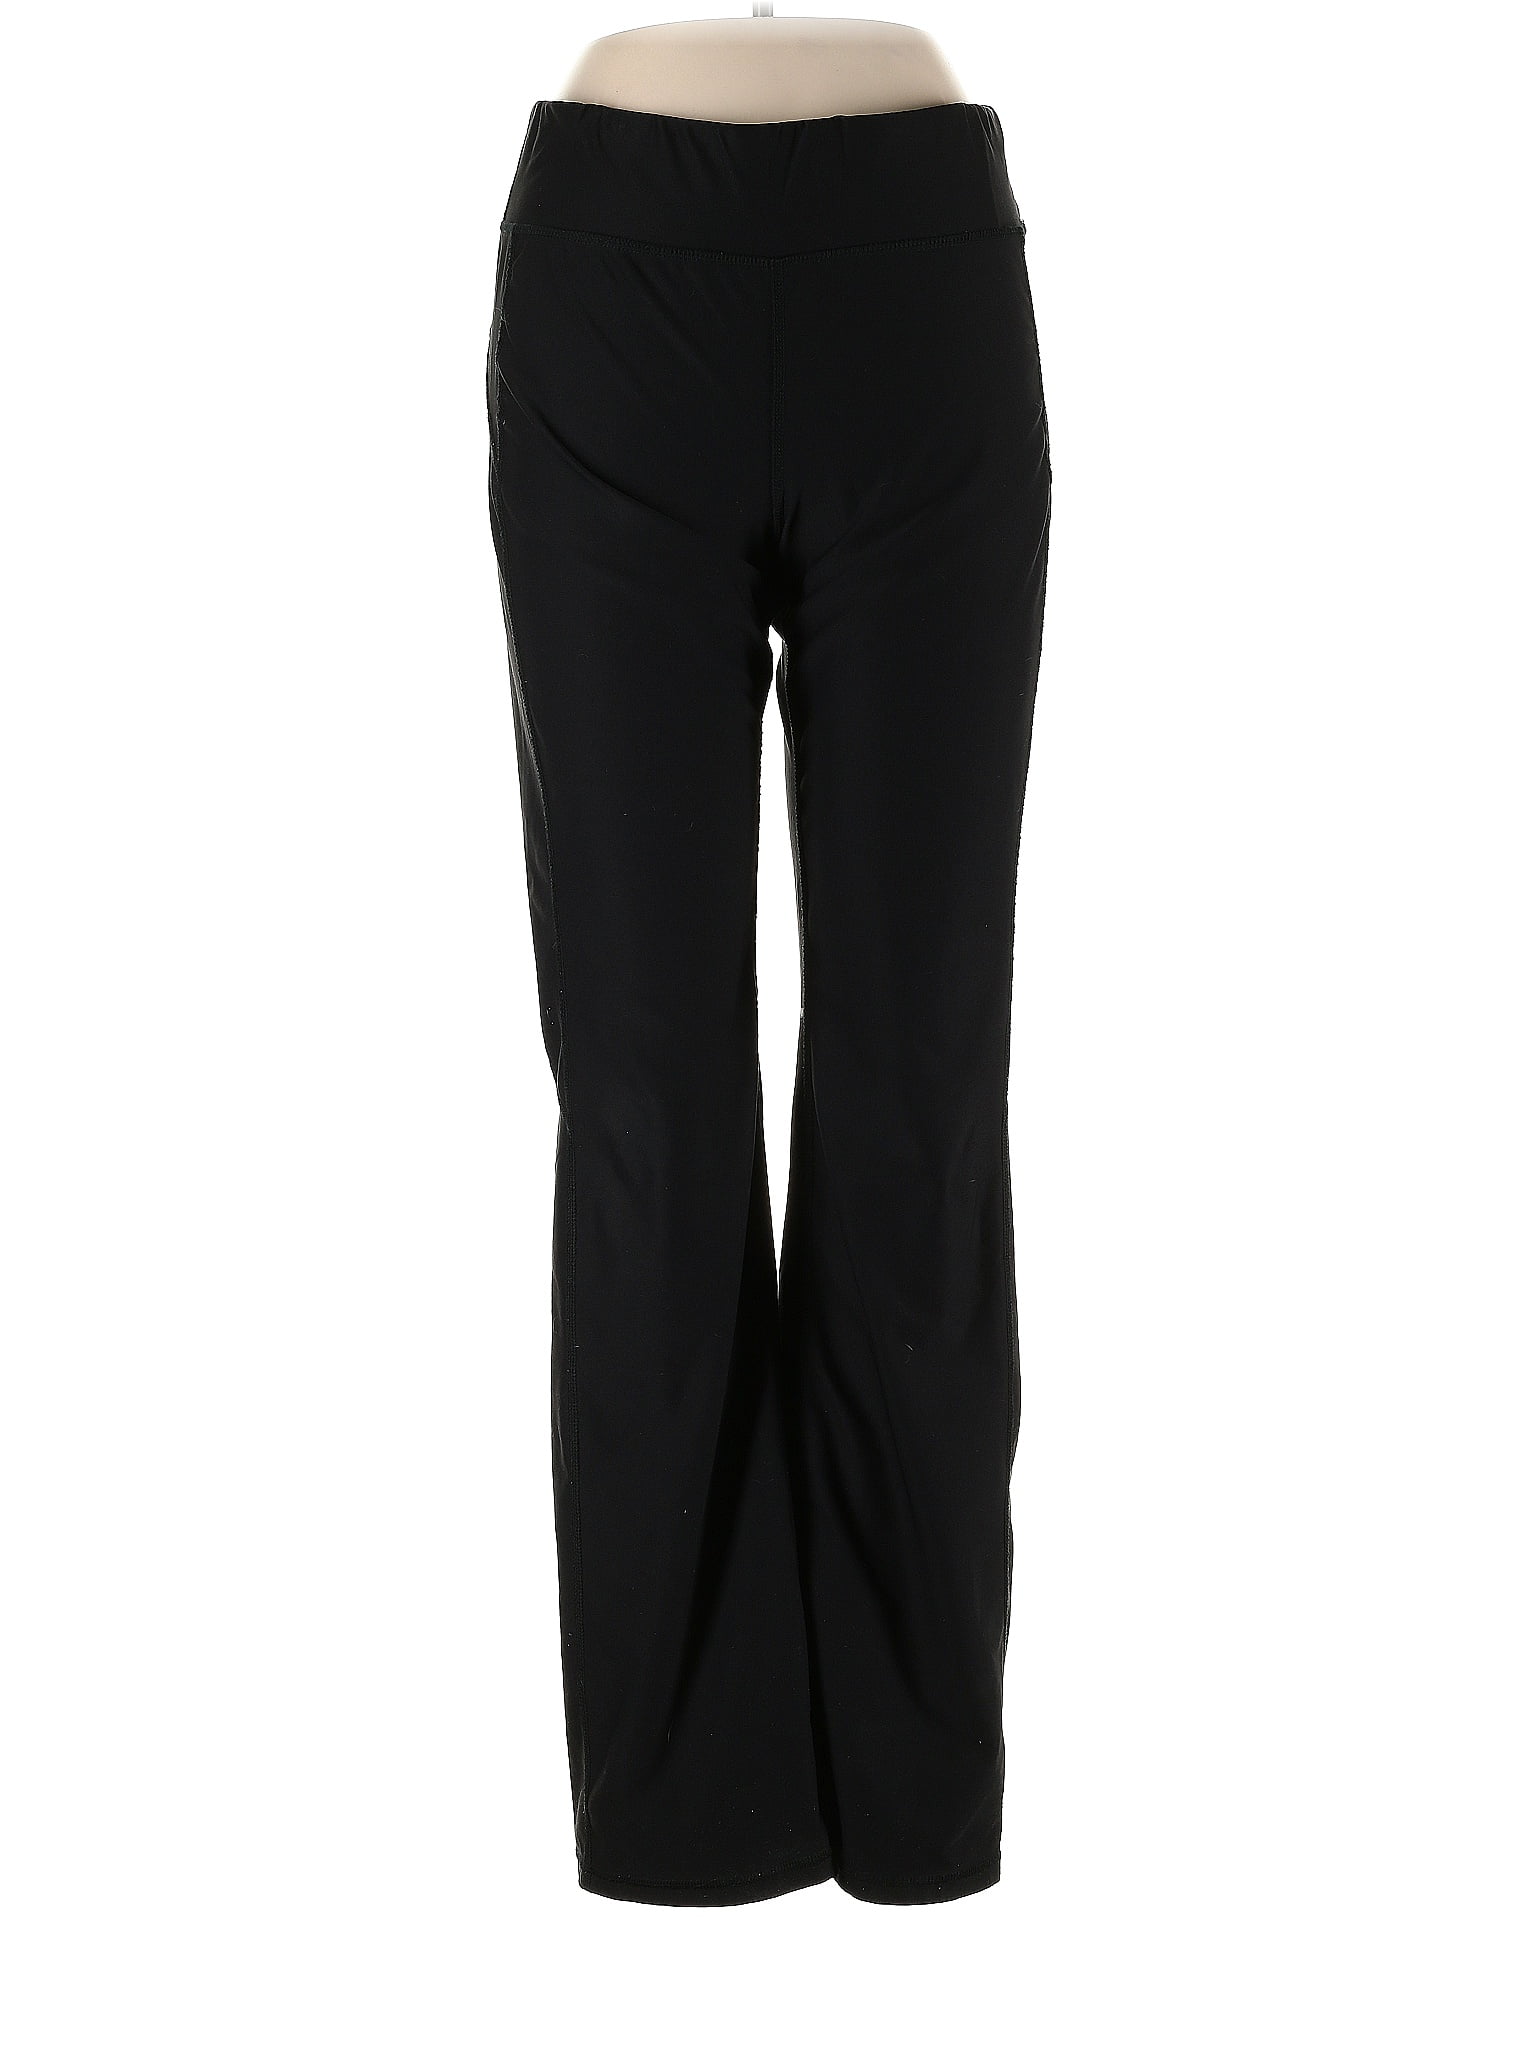 Xersion Solid Black Casual Pants Size L - 52% off